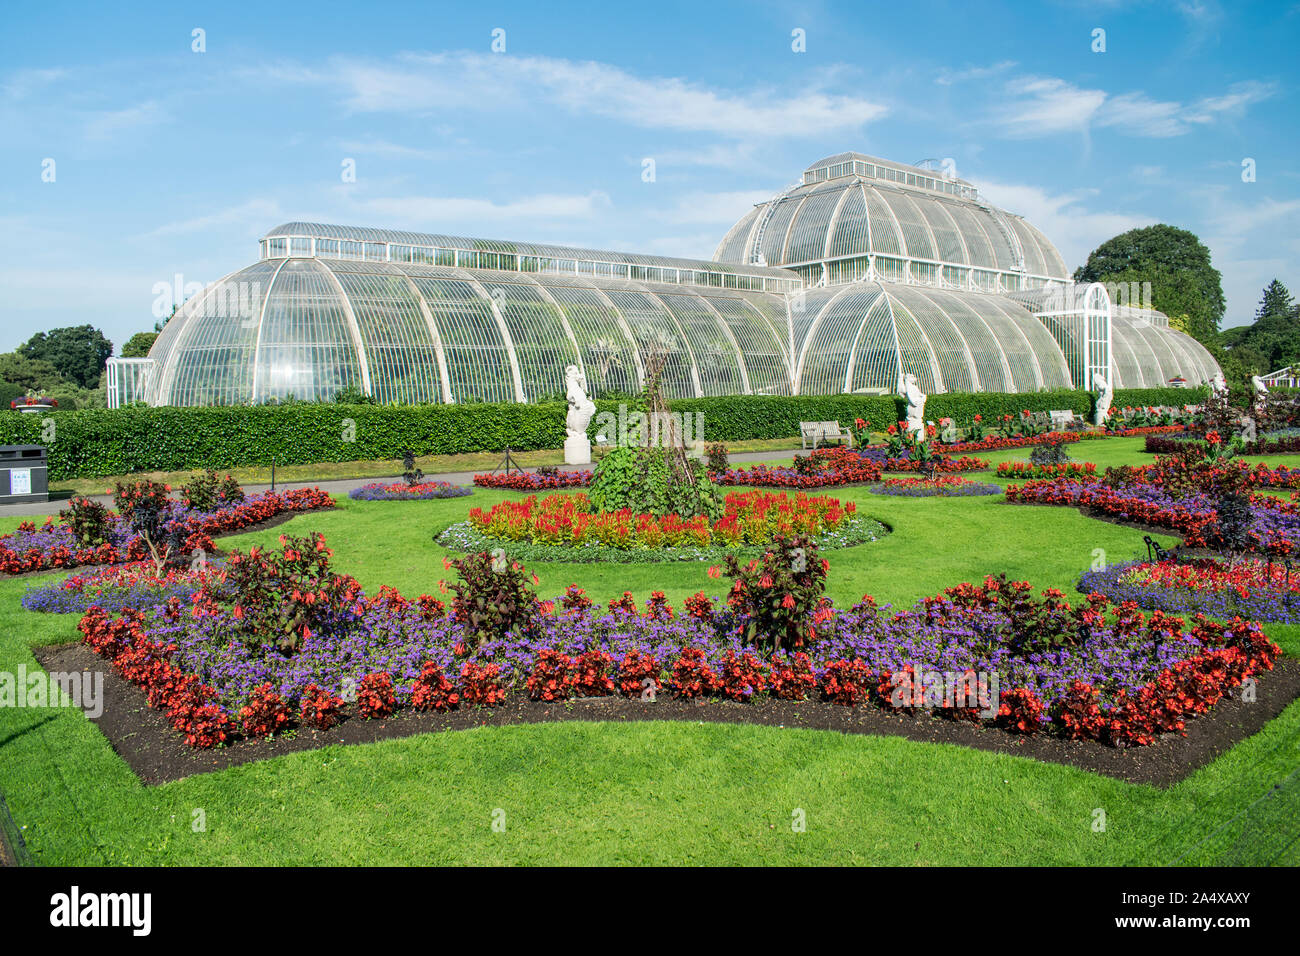 Palm House at Kew Gardens with flower display in full bloom with no people in view, Royal Botanic Gardens, Kew, London, England Stock Photo